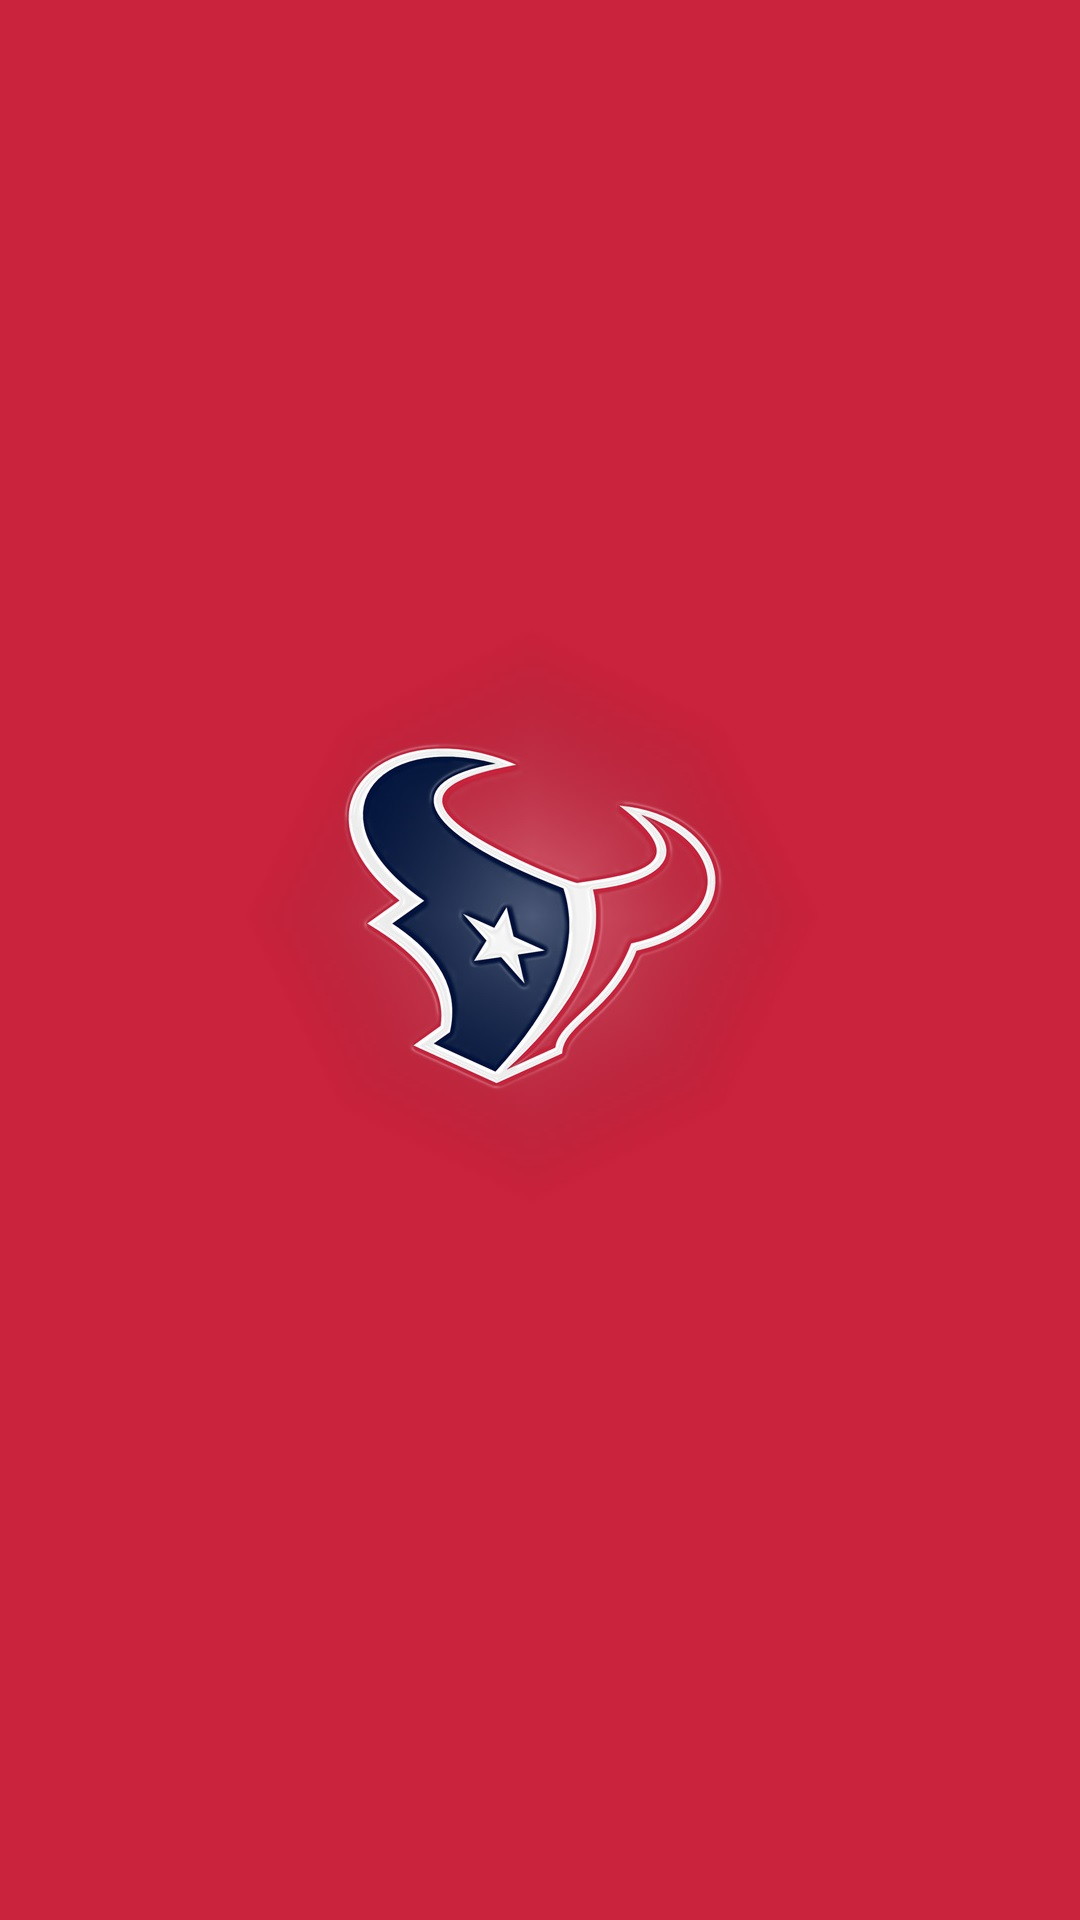 Houston Texans iPhone Lock Screen Wallpaper With high-resolution 1080X1920 pixel. Donwload and set as wallpaper for your iPhone X, iPhone XS home screen backgrounds, XS Max, XR, iPhone8 lock screen wallpaper, iPhone 7, 6, SE, and other mobile devices